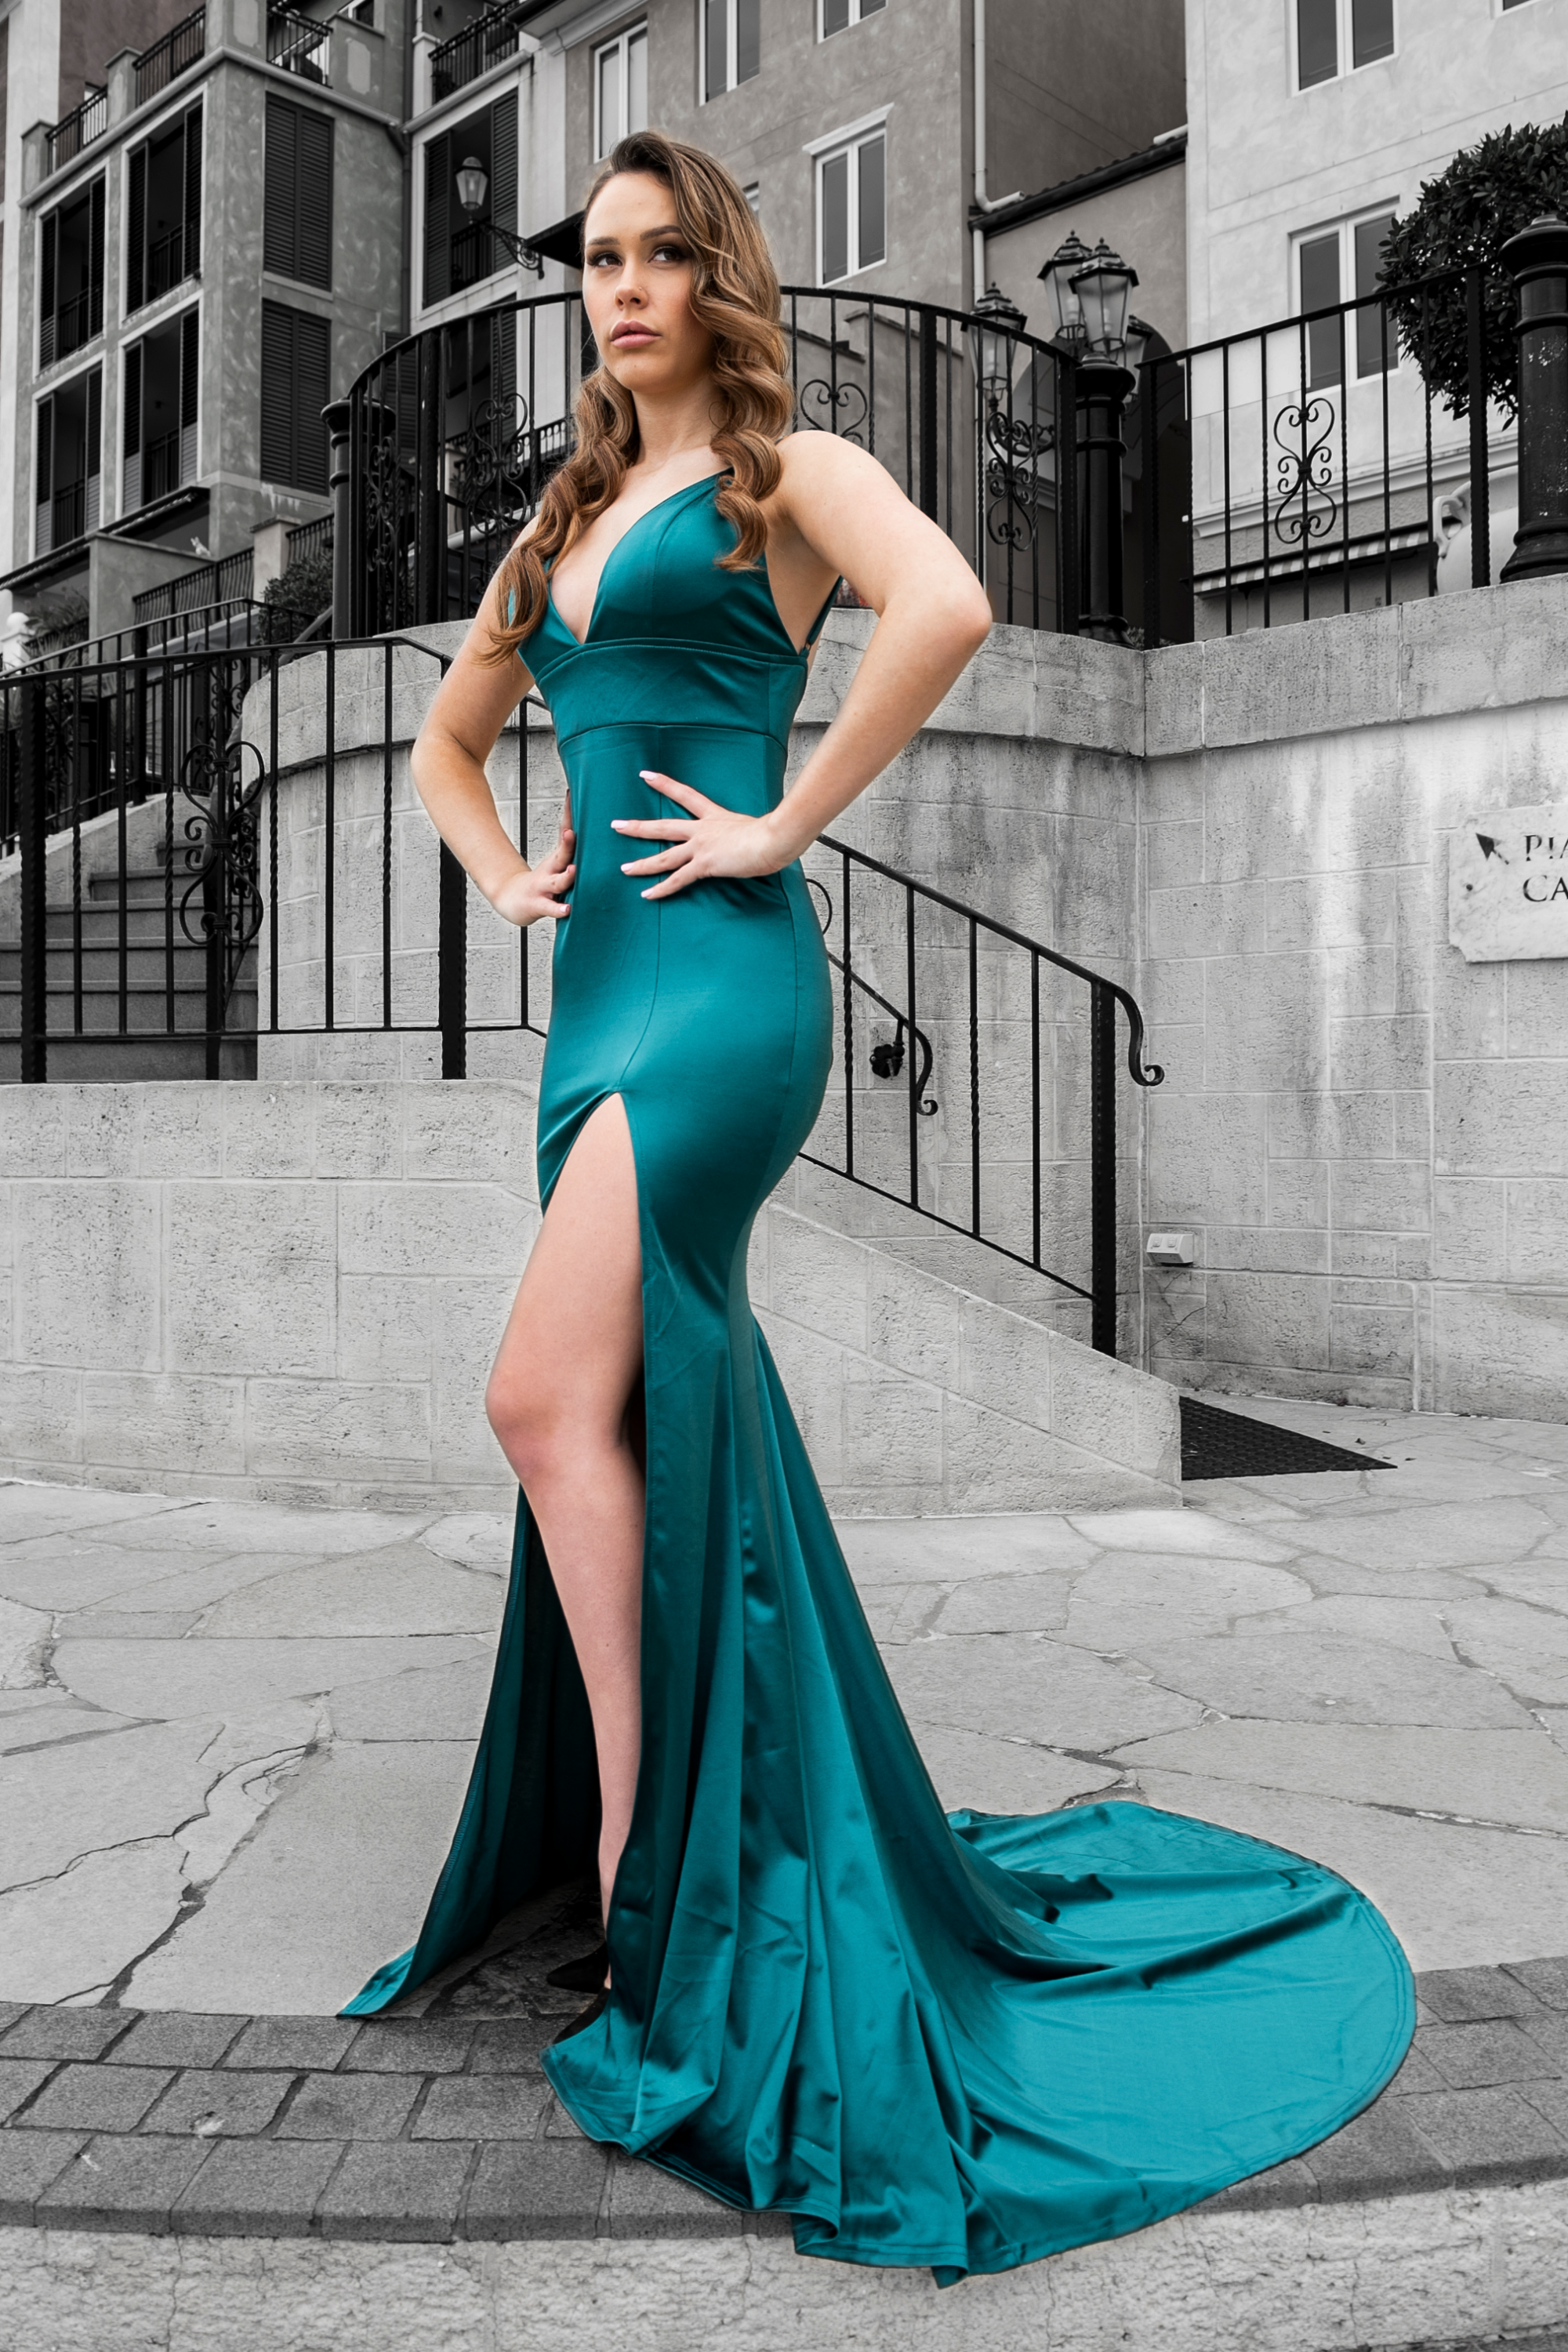 Honey Couture AISHA Emerald Green Low Back Mermaid Evening Gown Dress Honey Couture$ AfterPay Humm ZipPay LayBuy Sezzle